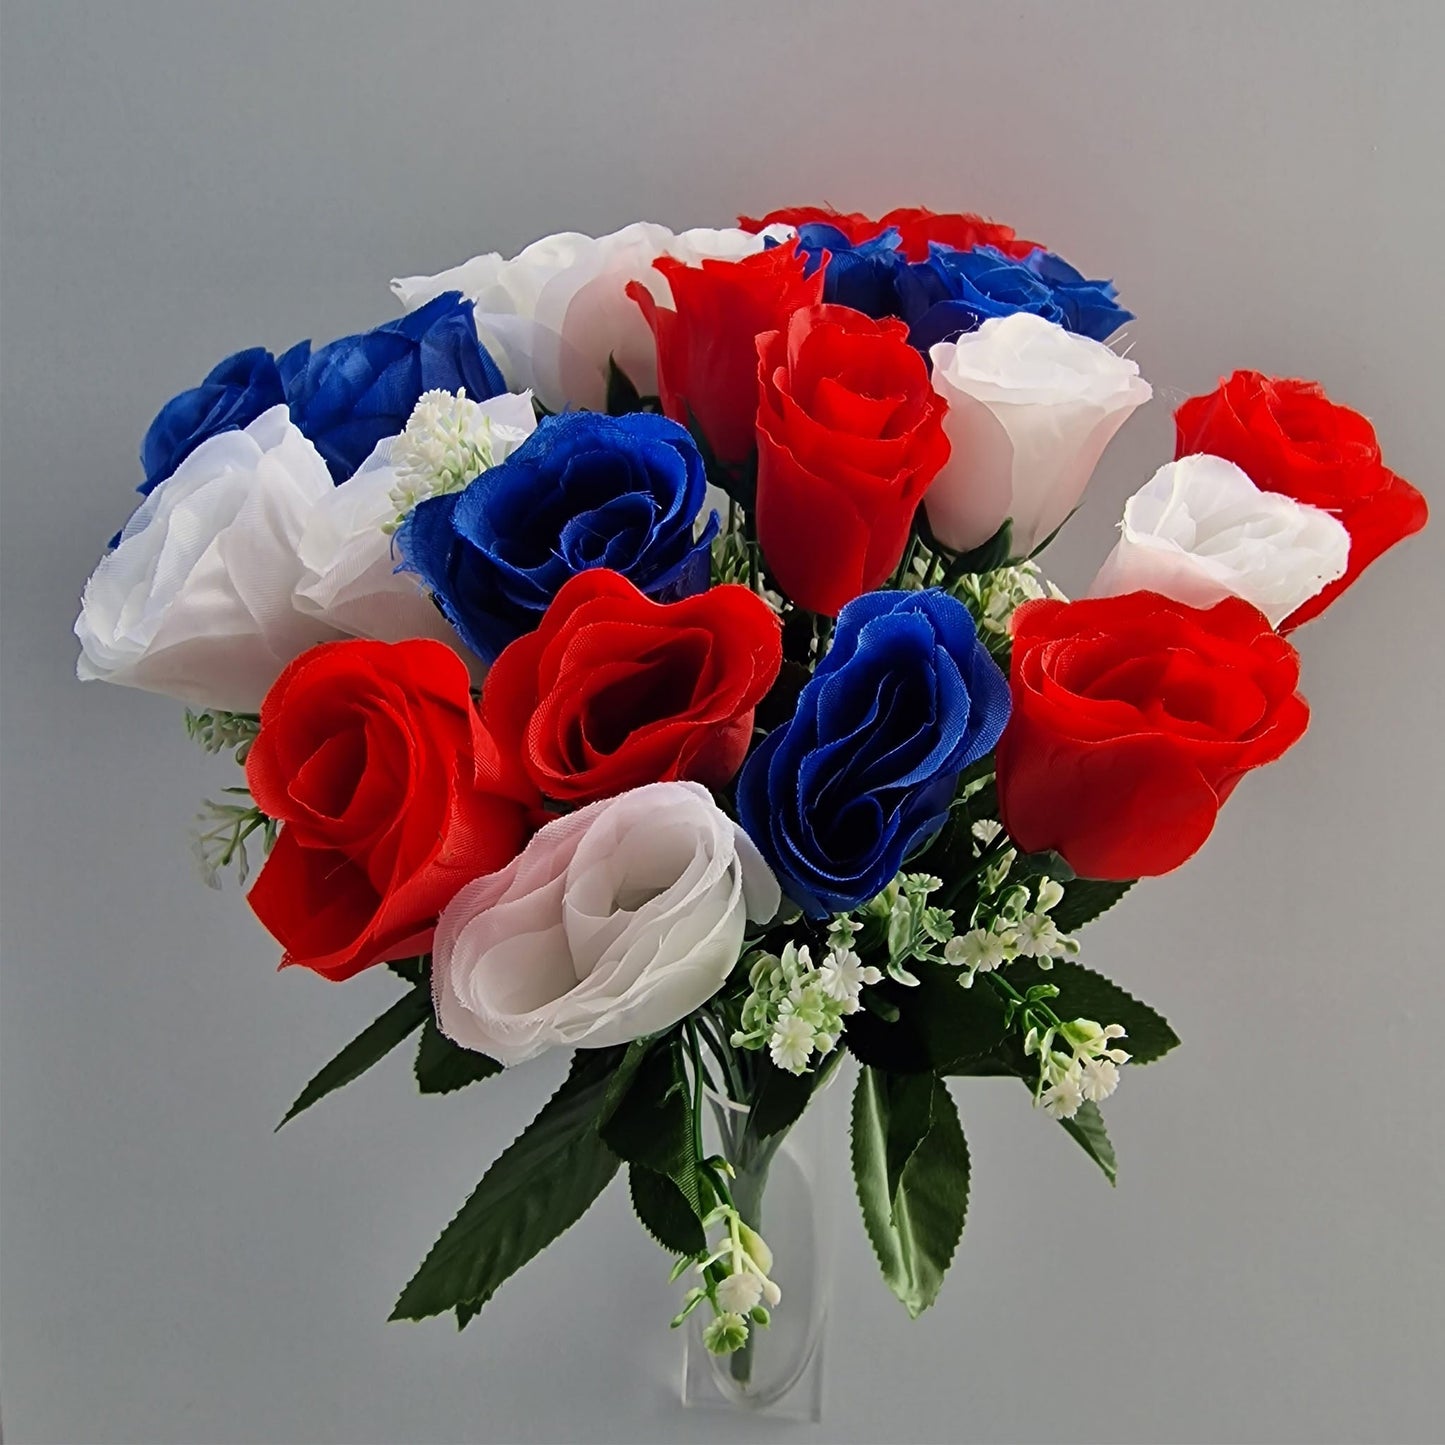 24 Head Large Rose Bouquet Red White and Blue - Amor Flowers